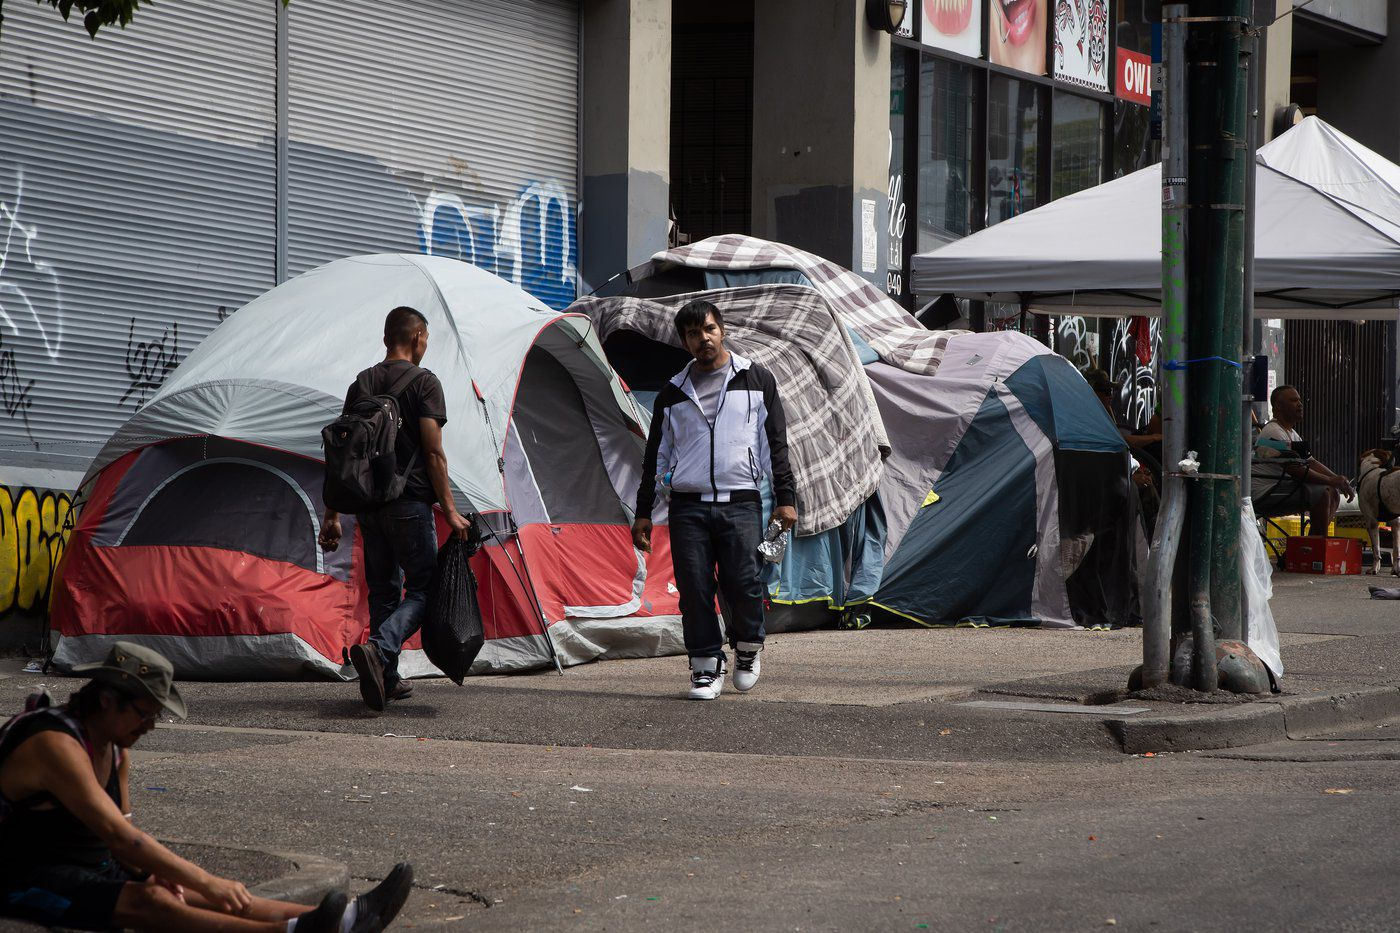 As Vancouver Dismantles Downtown Tent City Residents Say They Have Nowhere To Go Canada S National Observer News Analysis